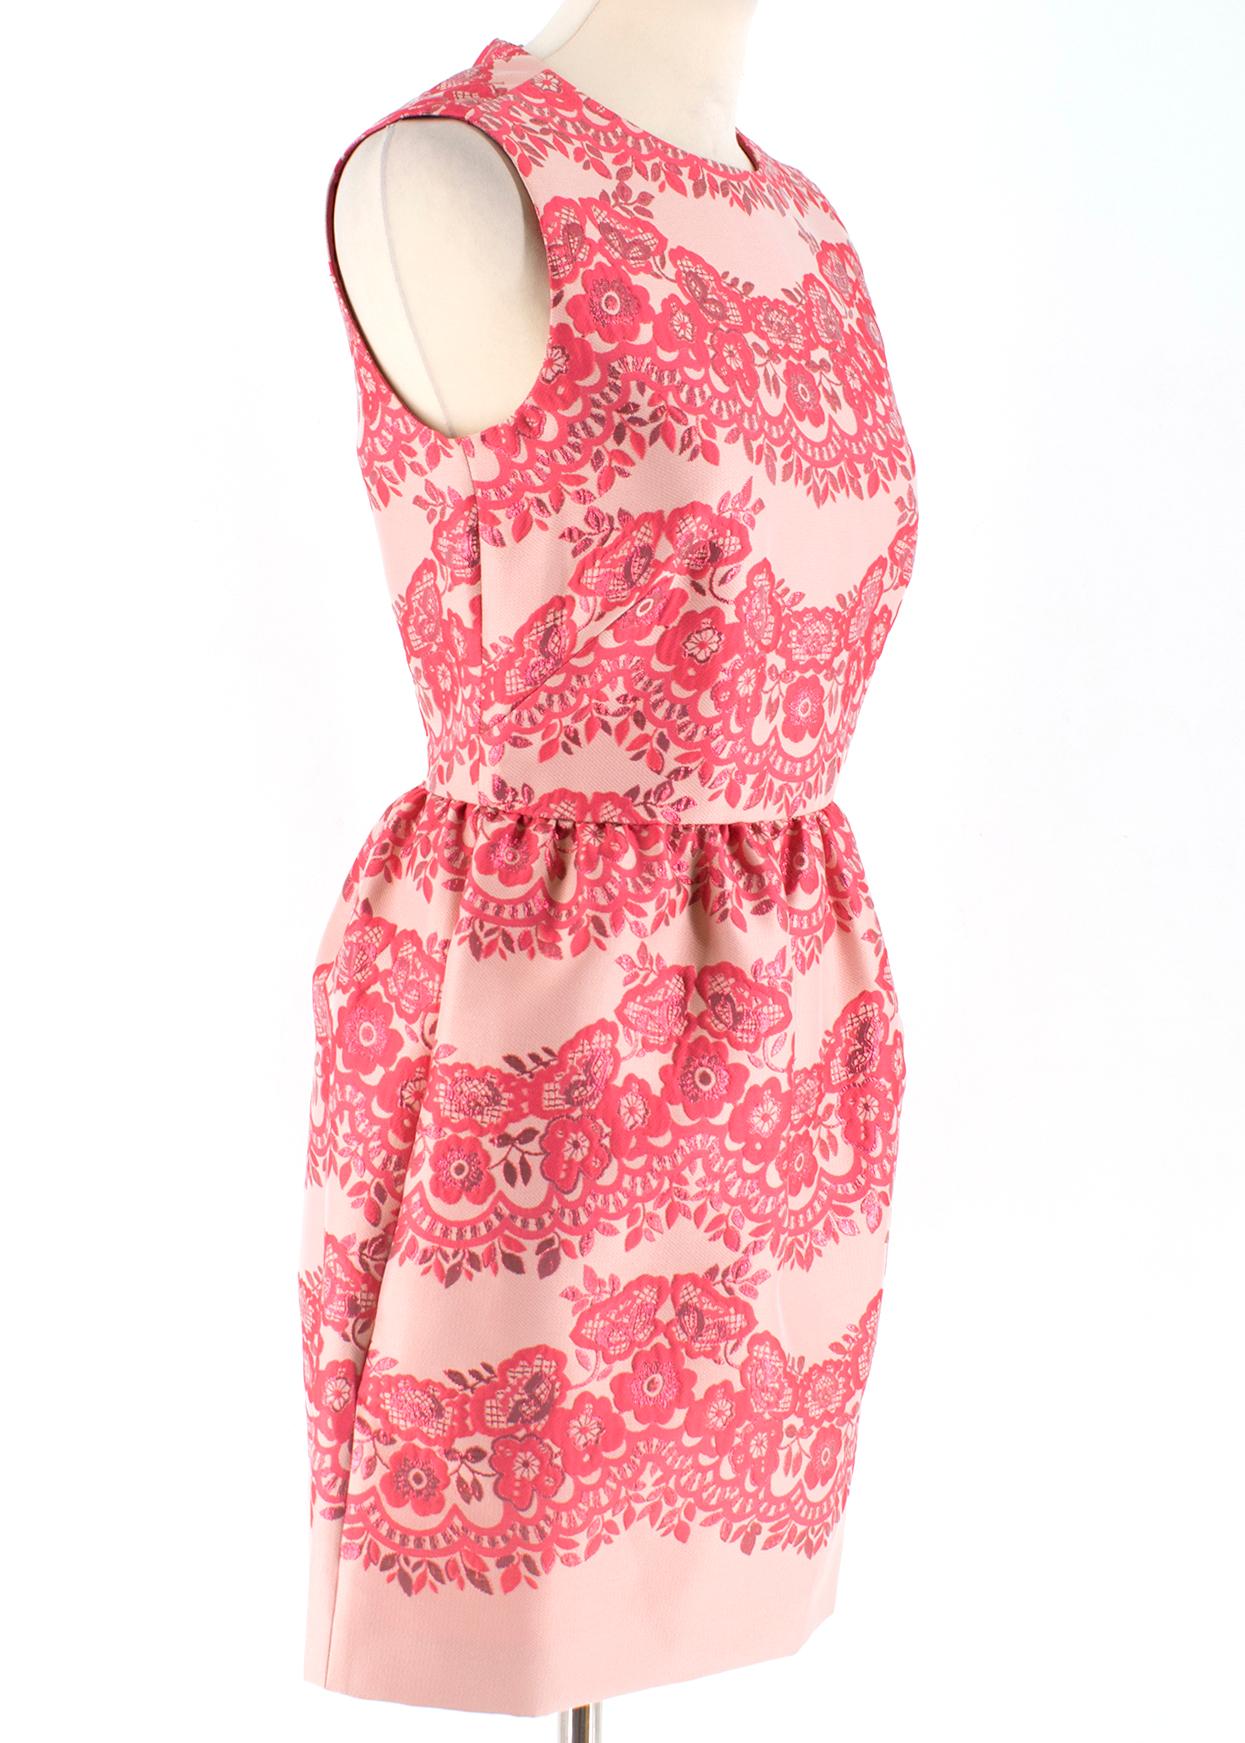 Red Valentino Pink Floral-pattern Jacquard Mini Dress 

- Sleeveless and high neck-line
-Unlined
- Back fastening zip 
- A-line skirt 

Please note, these items are pre-owned and may show signs of being stored even when unworn and unused. This is